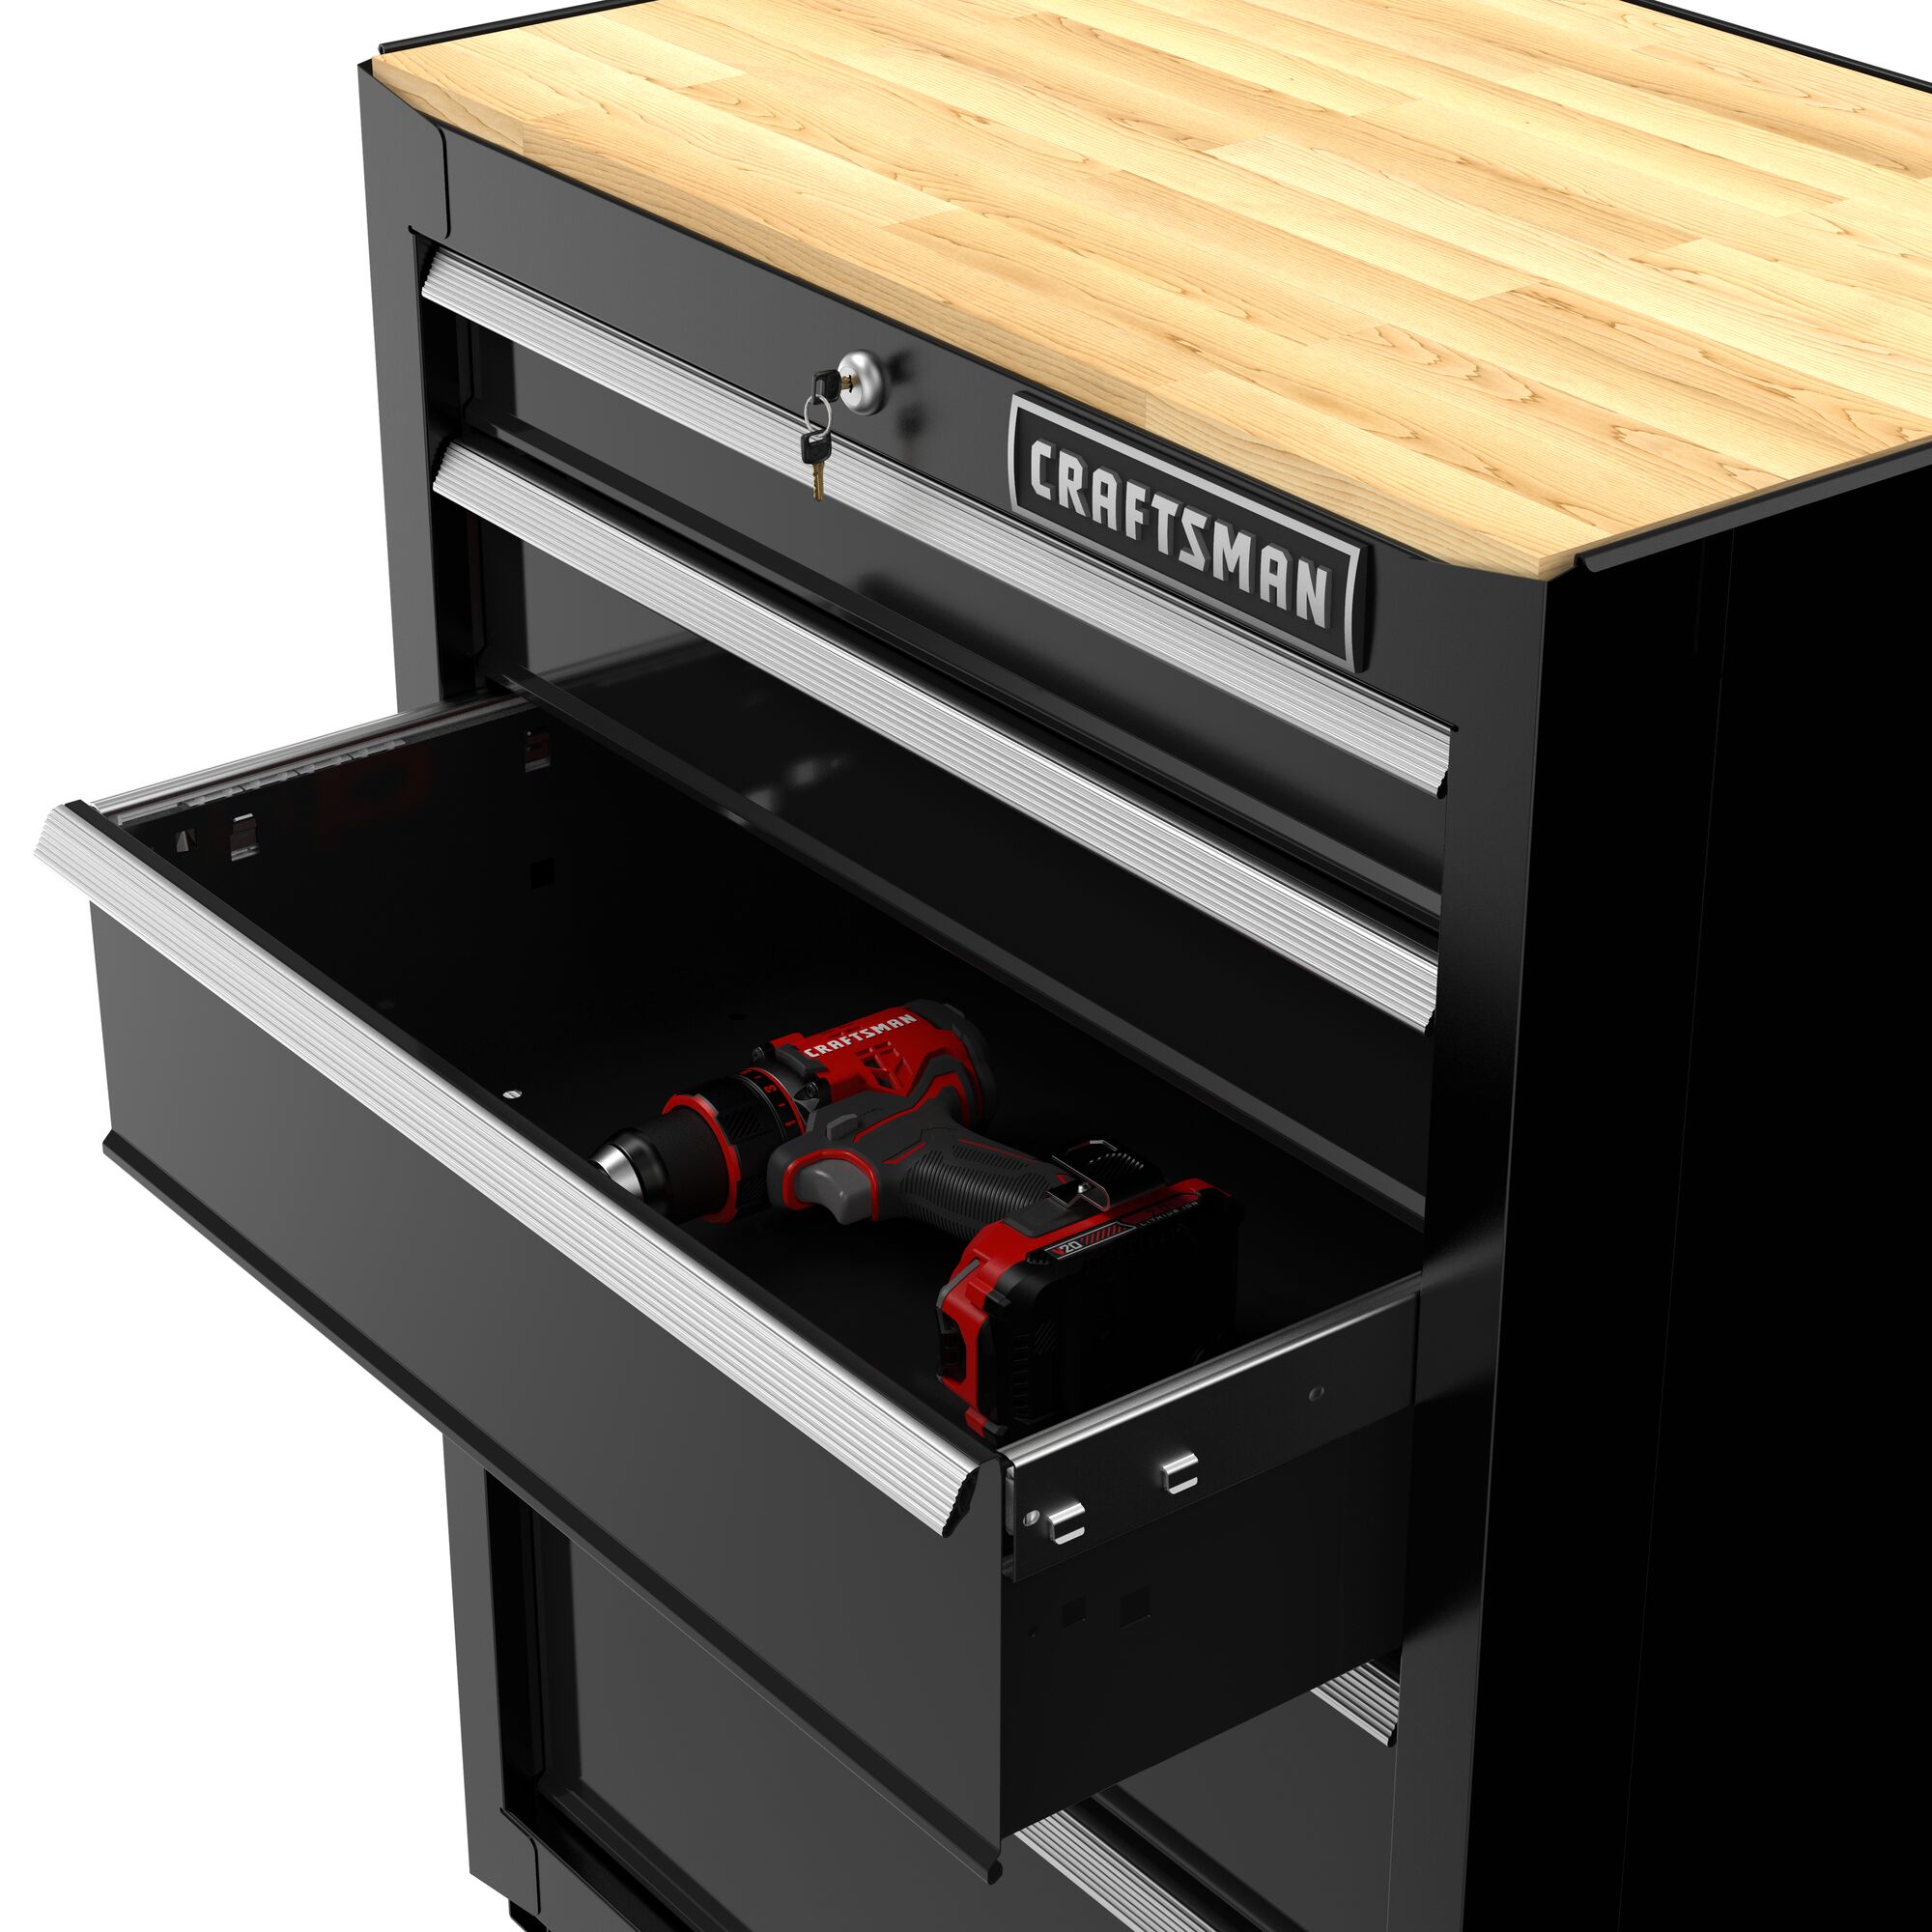 CRAFTSMAN 26.5-in wide 5-drawer base cabinet angled view with drawer open and tool inside